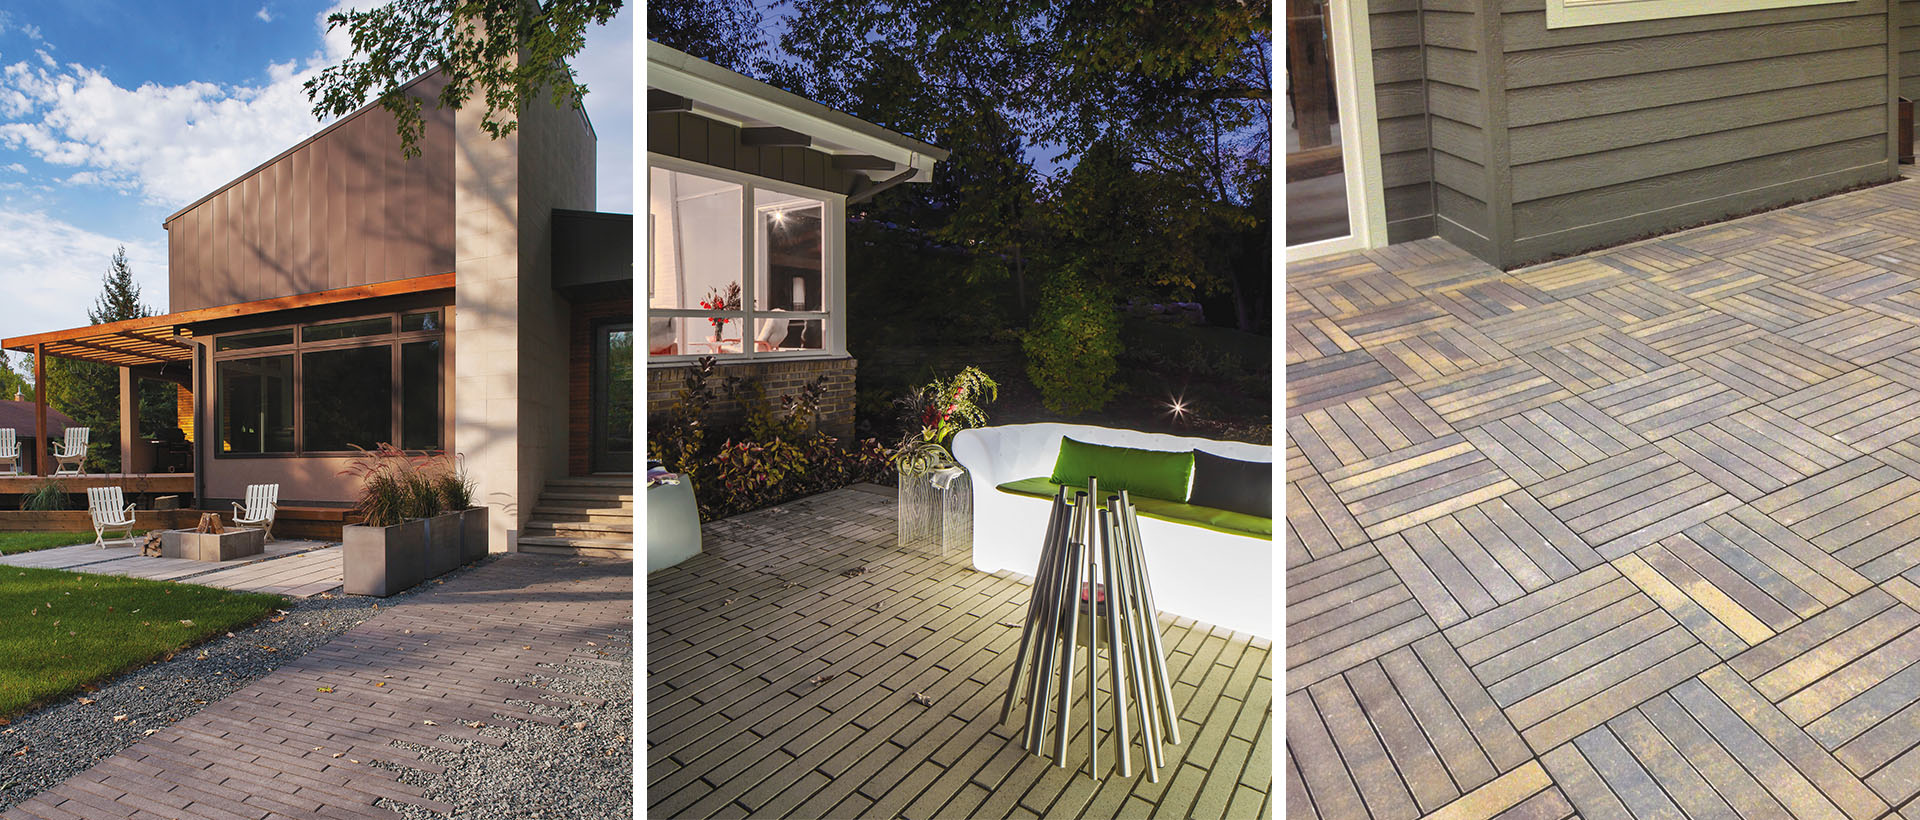 The narrow profile of the Broadmour Plank paver creates a unique, contemporary look for walkways, boulevards and patios.